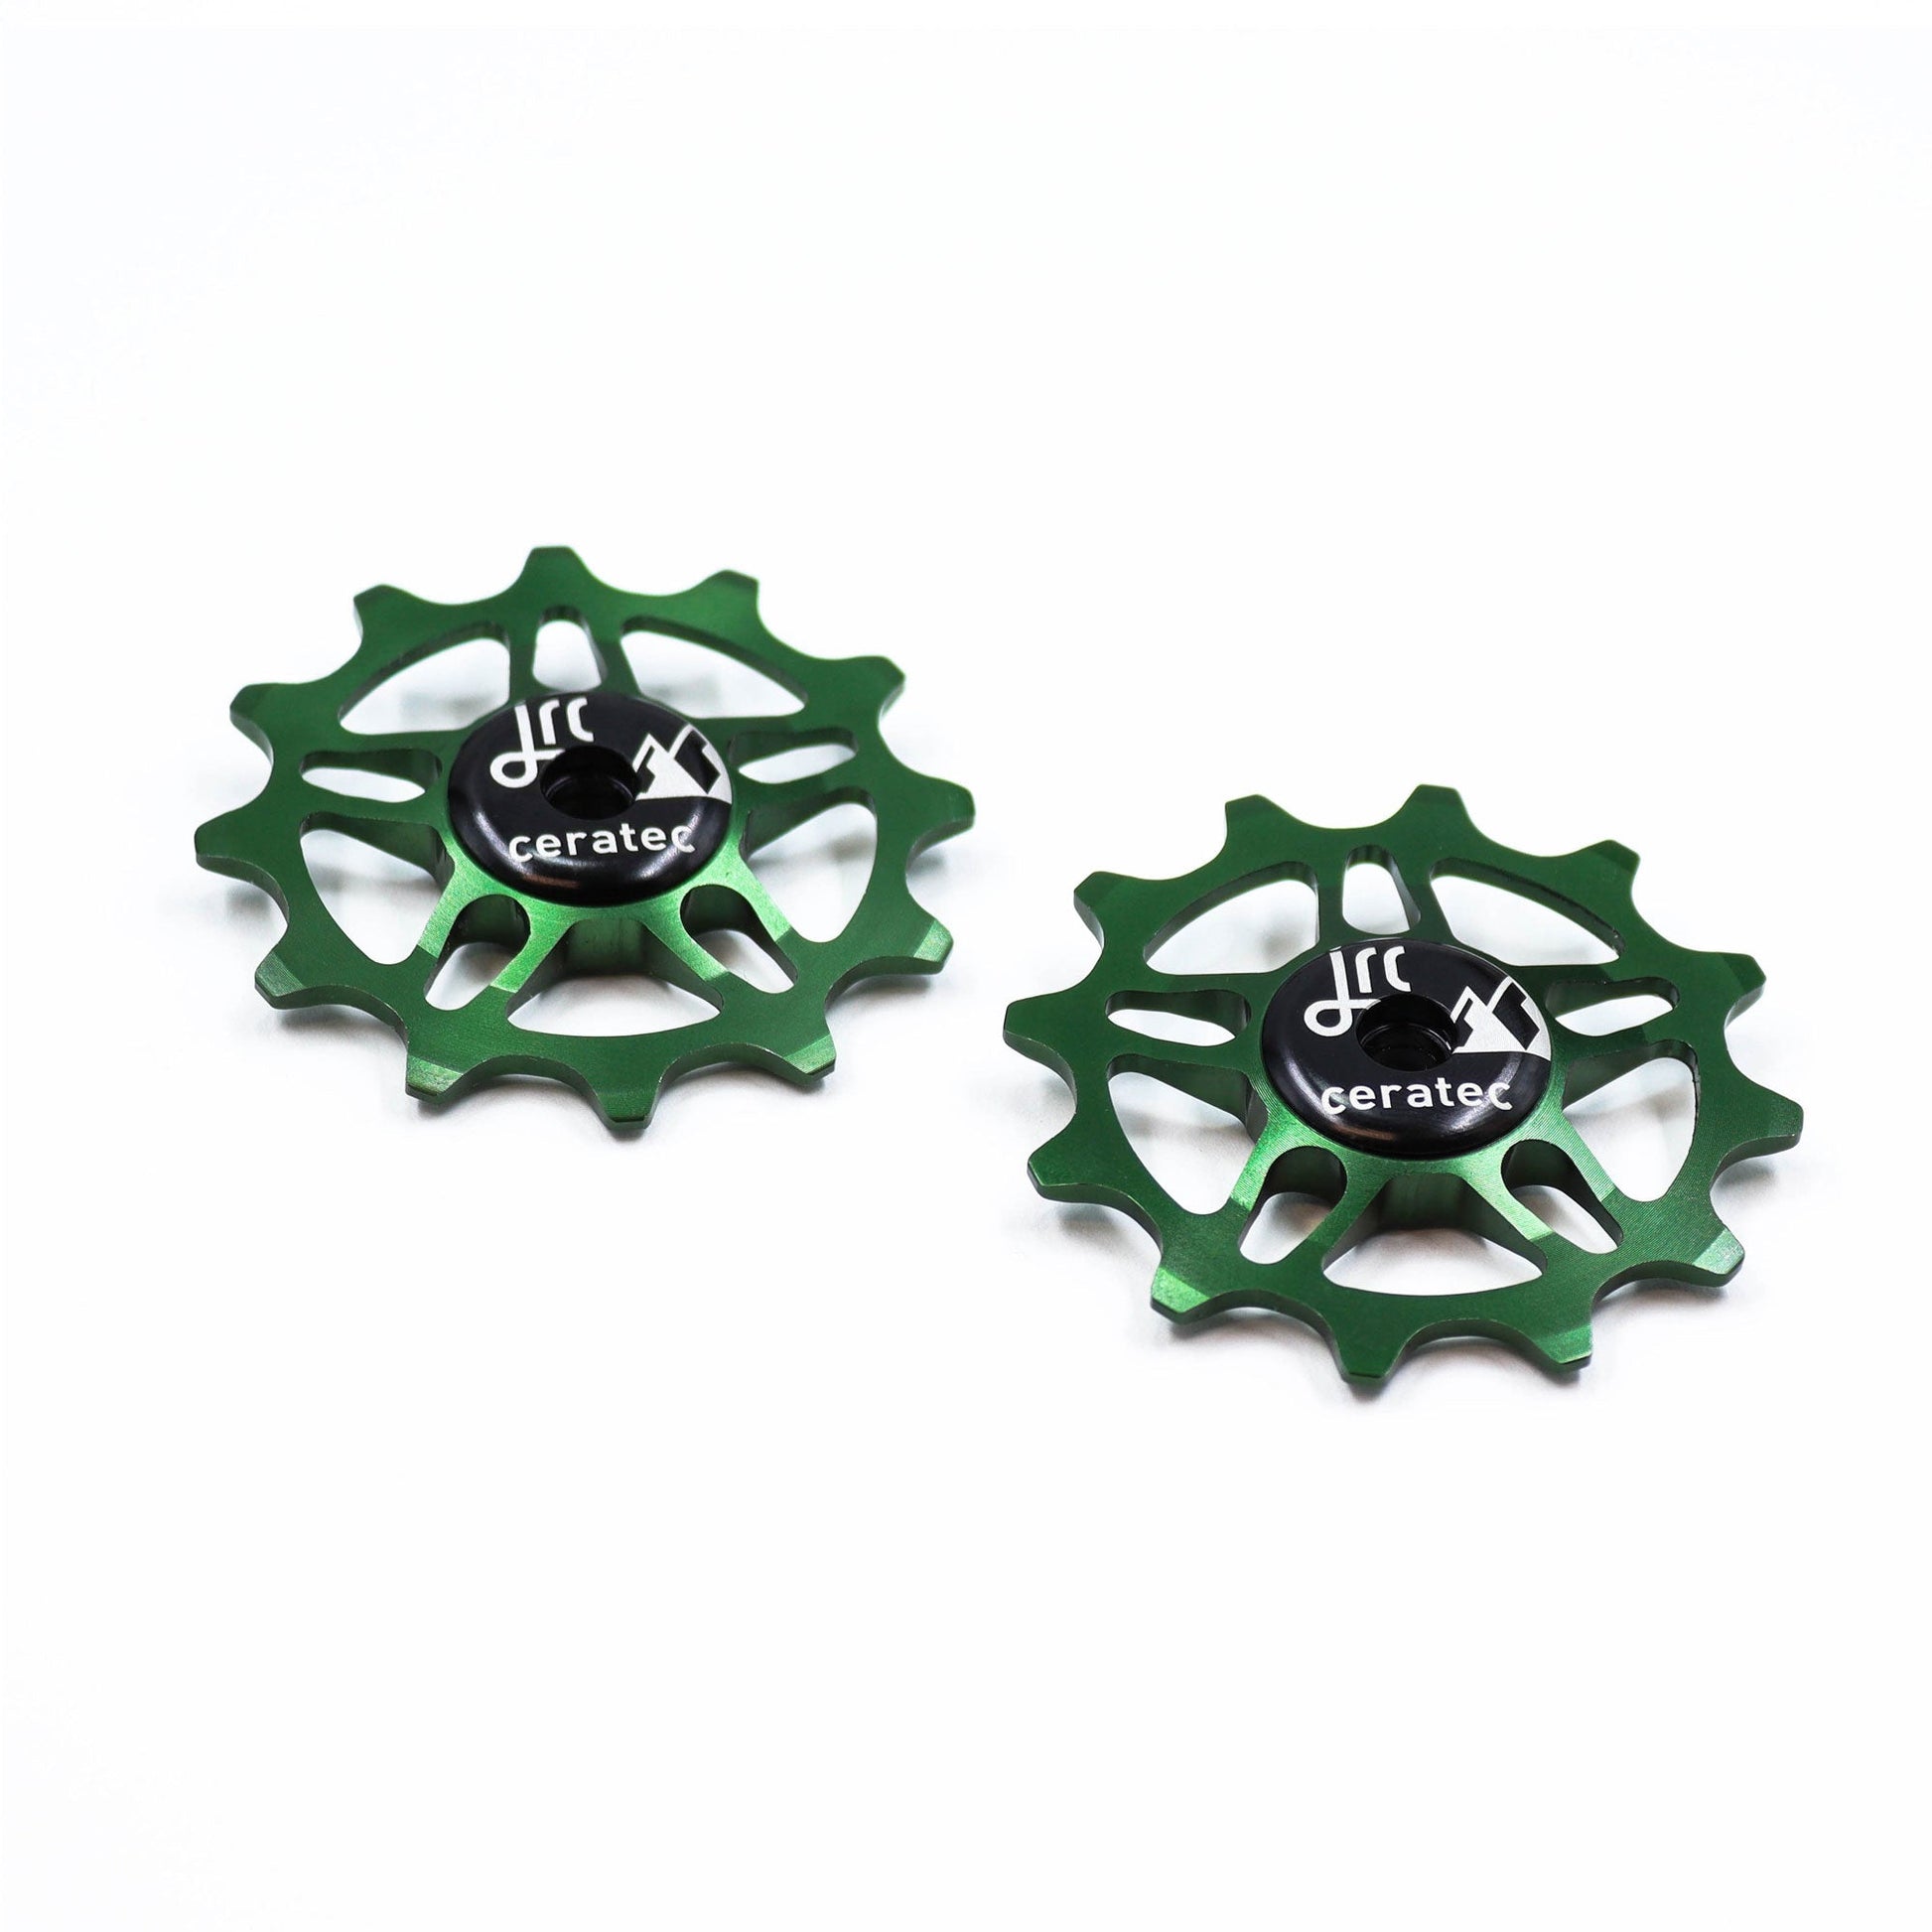 Emerald green, lightweight aluminium pulley wheel set for bicycles, compatible with 12 tooth SRAM Rival/ Force/ Red/ AXS